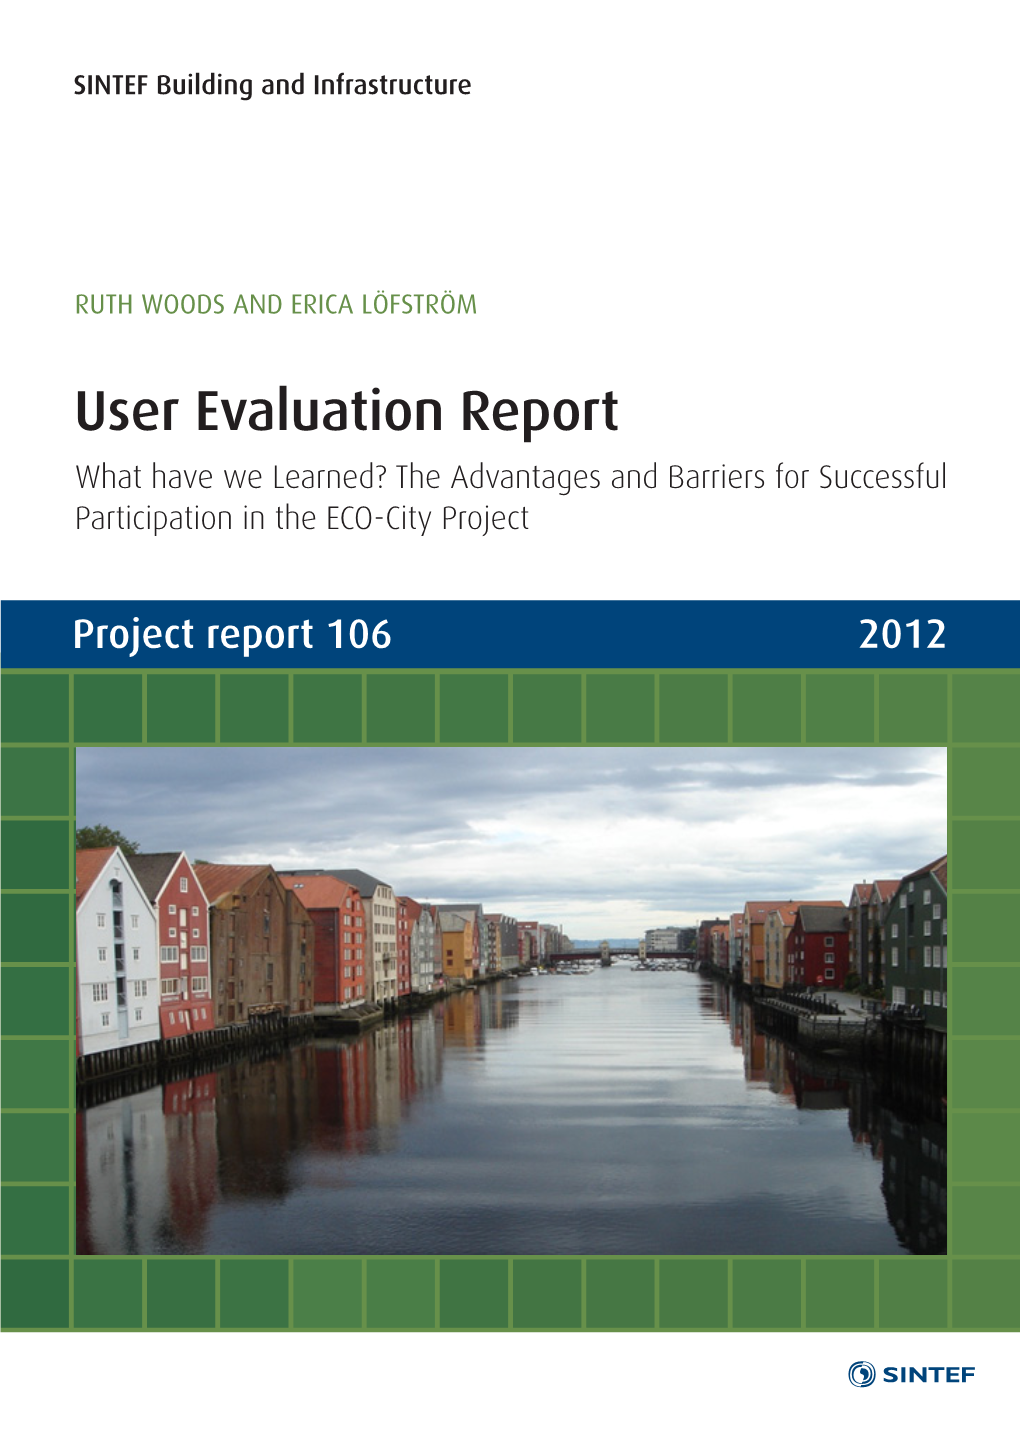 User Evaluation Report What Have We Learned? the Advantages and Barriers for Successful Participation in the ECO-City Project